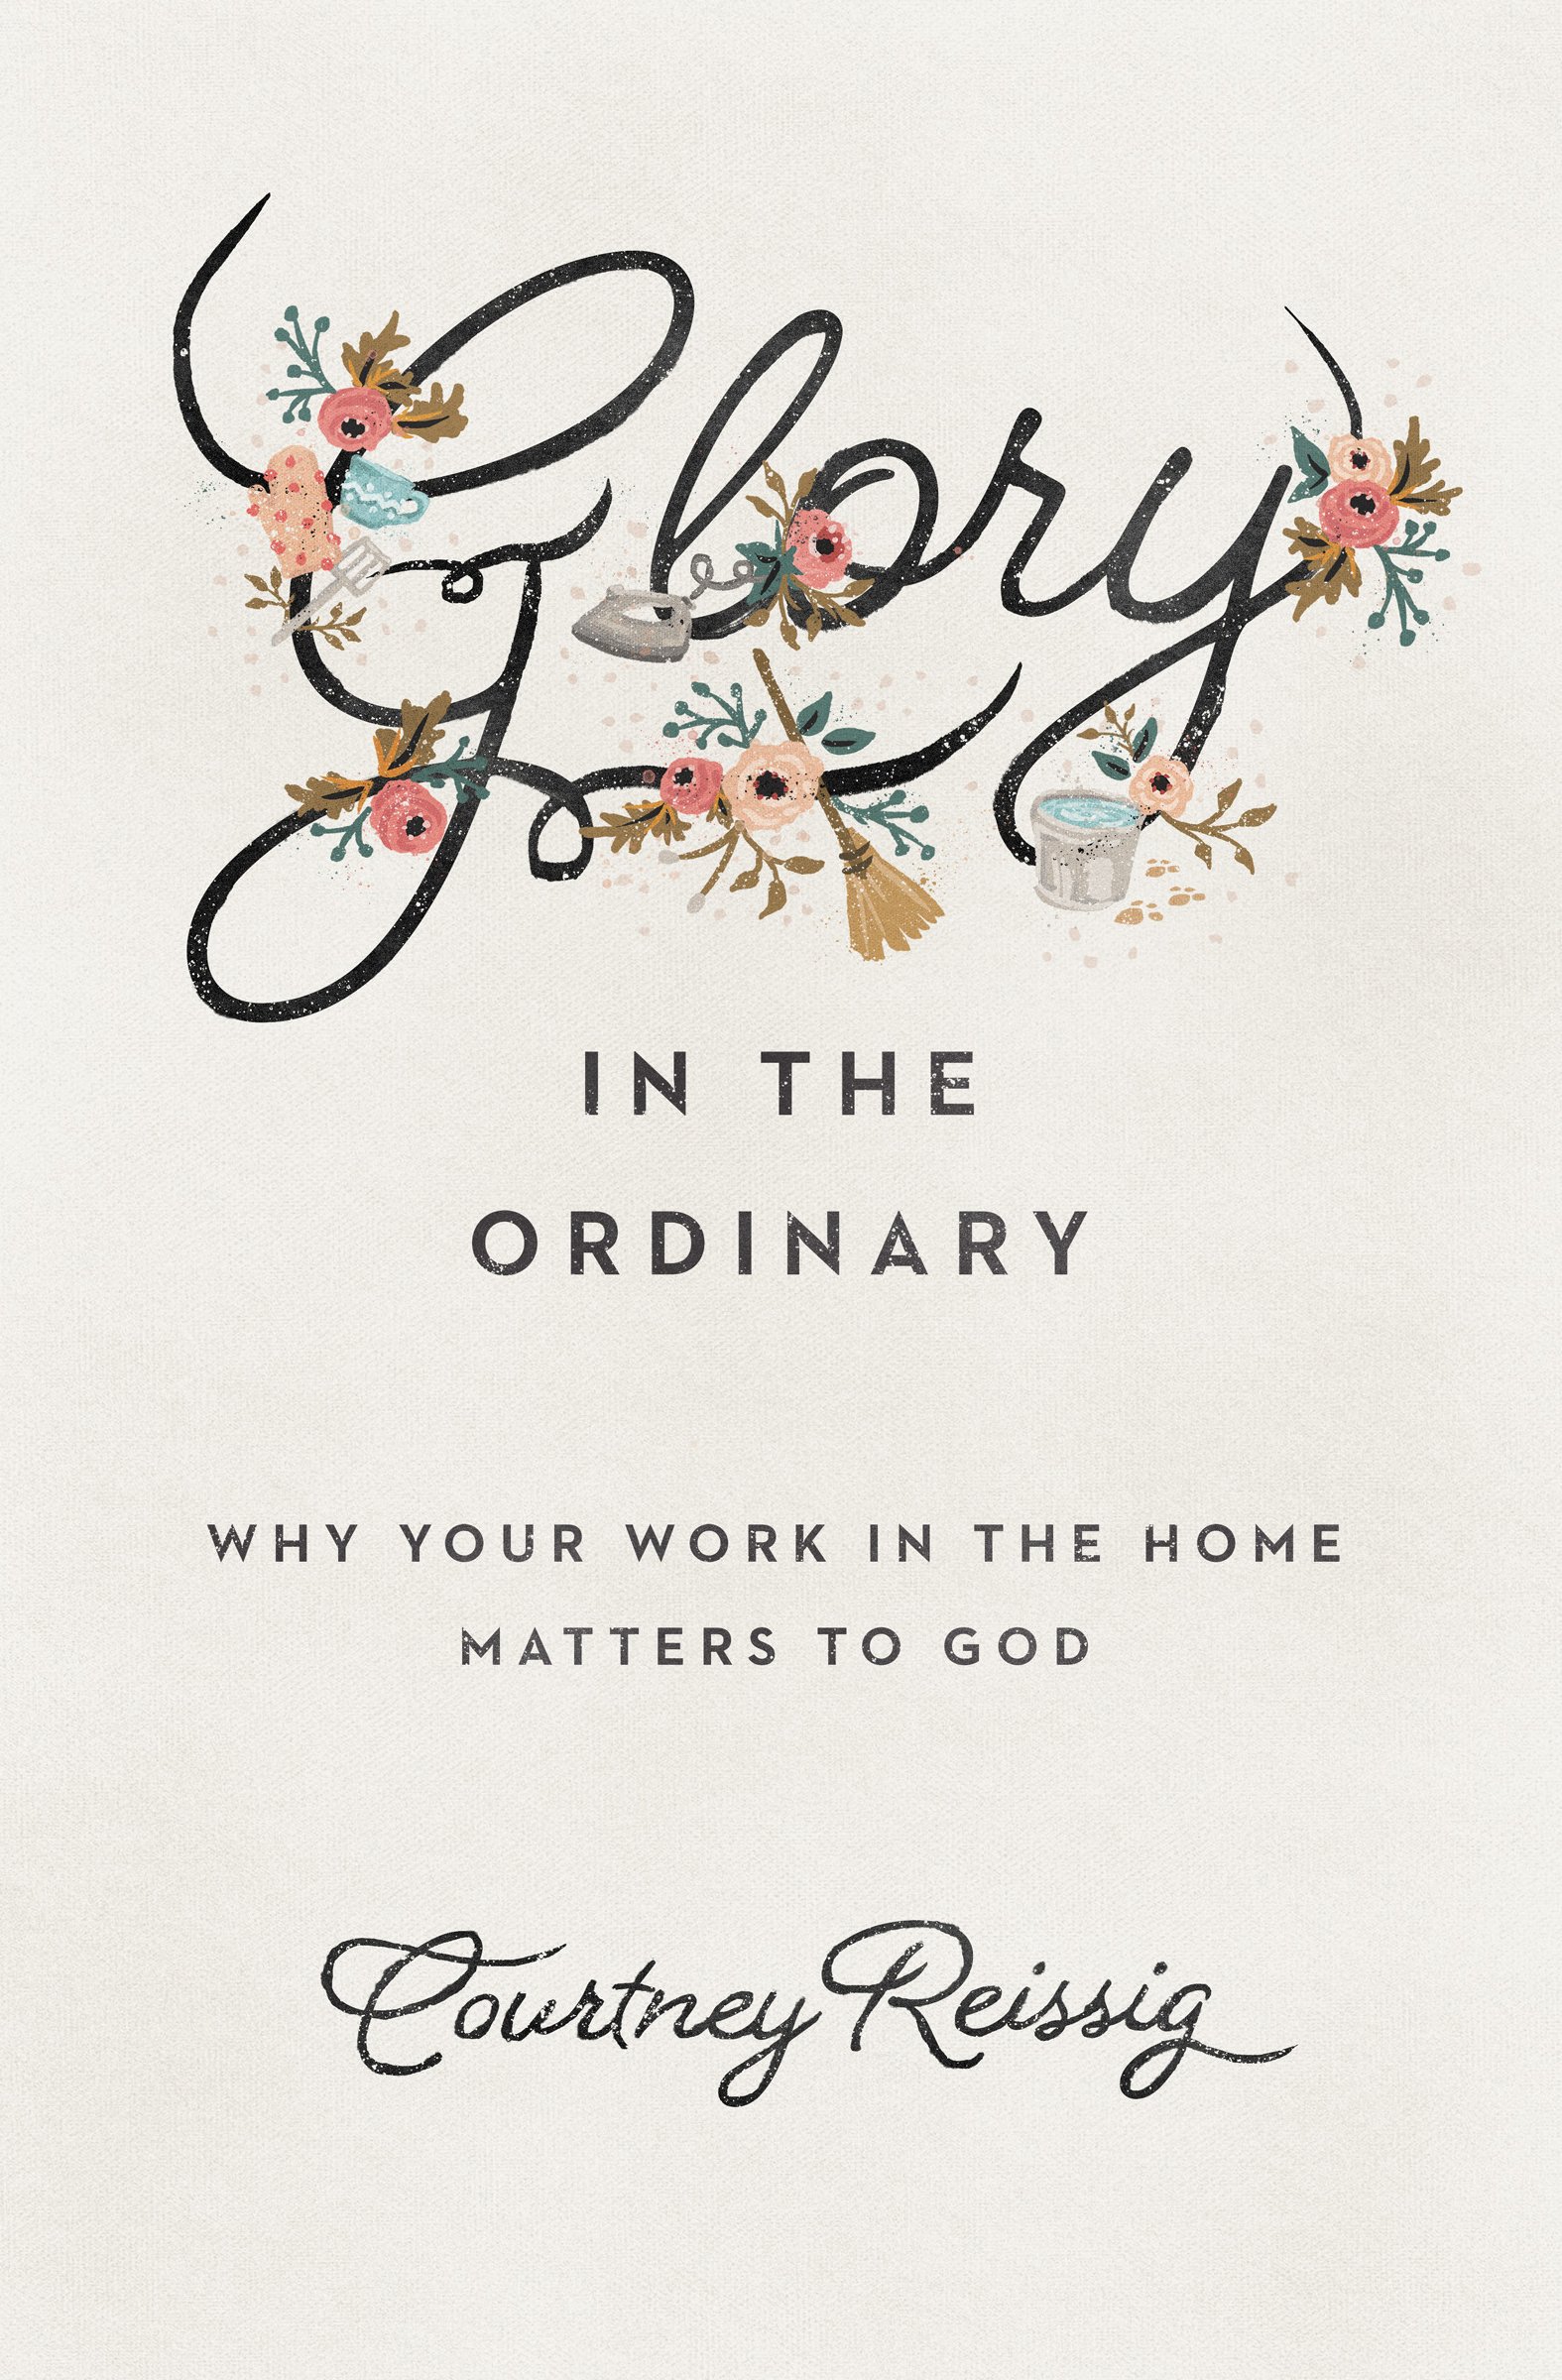 Book Notice: GLORY IN THE ORDINARY: WHY YOUR WORK IN THE HOME MATTERS TO GOD, by Courtney Reissig